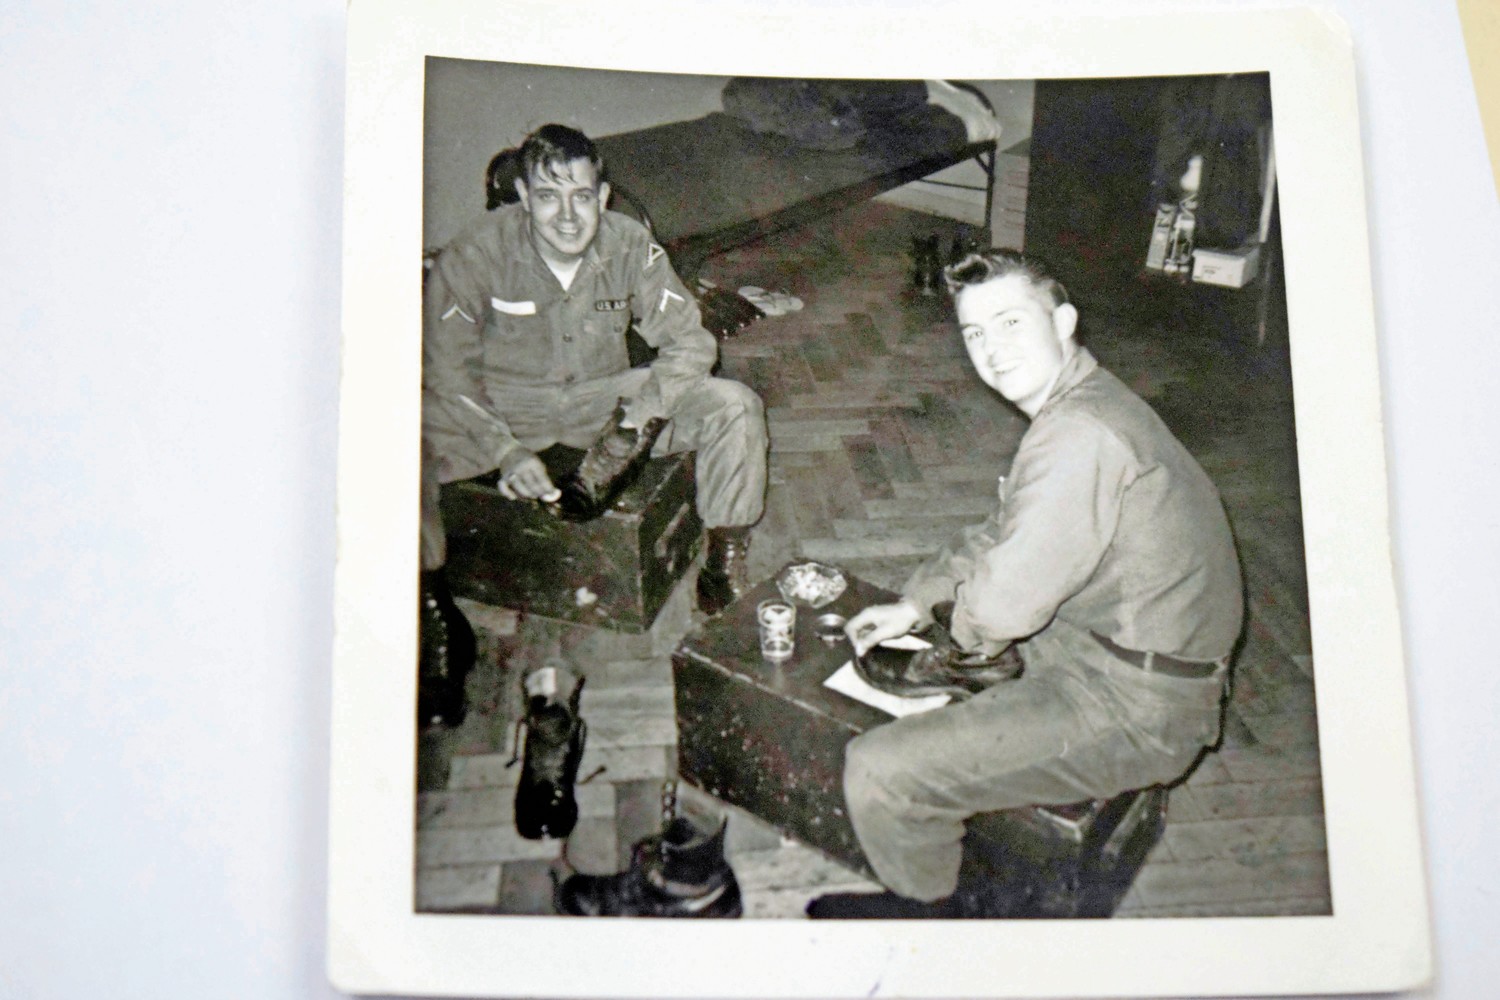 William Hoehn shined his boots during downtime while on border patrol in West Berlin in 1966. The Seaford native told the Herald this week how he was drafted into the Army at the height of the Vietnam War.